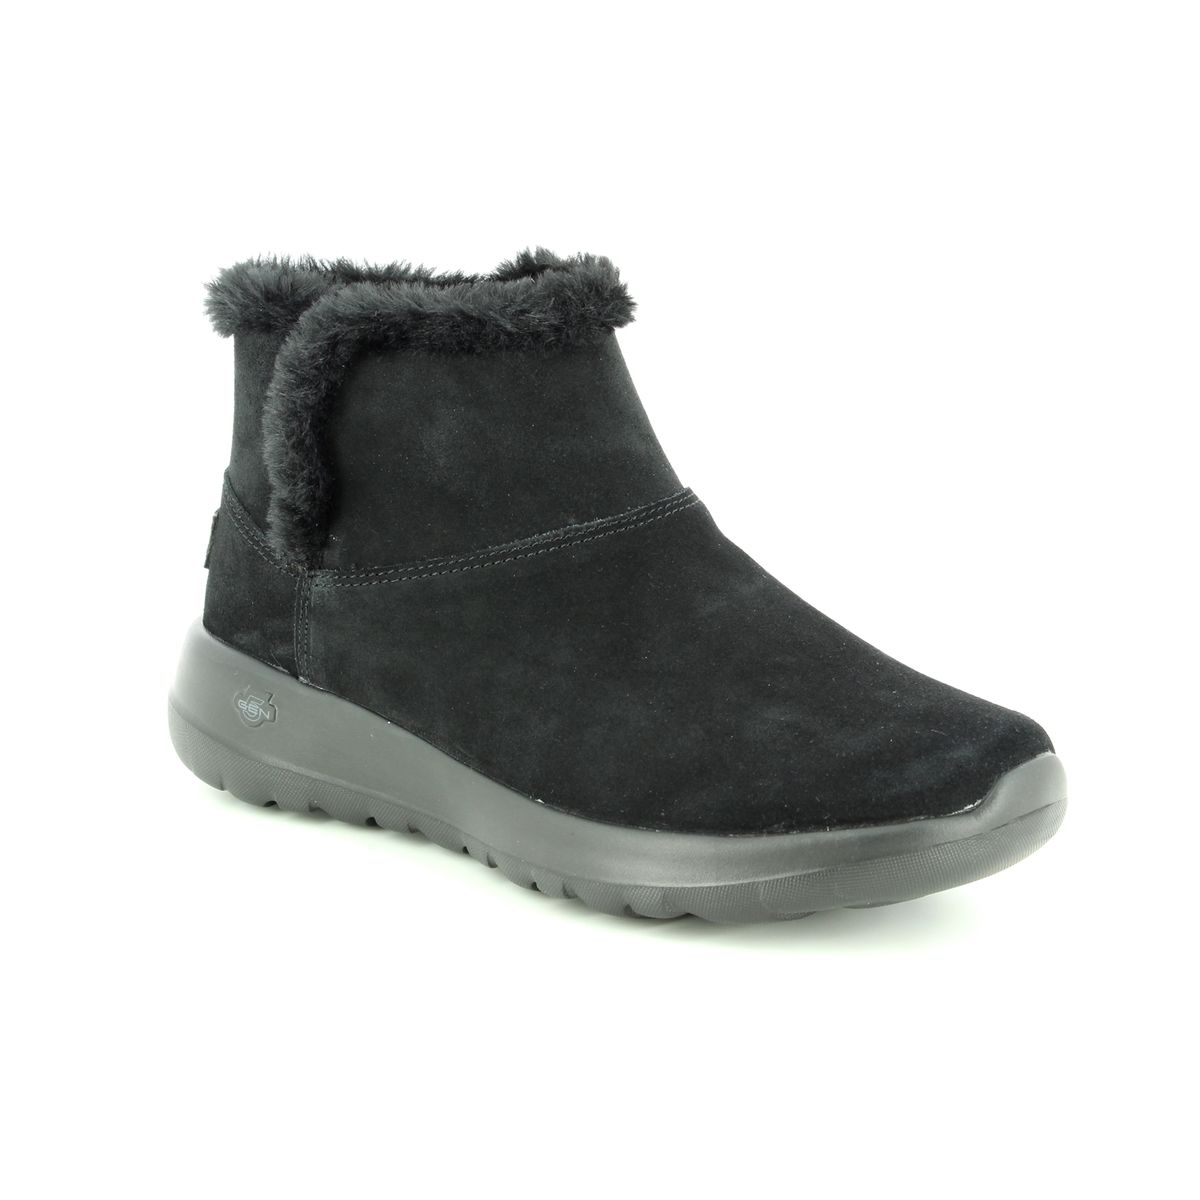 sketchers ankle boots for women Sale,up 